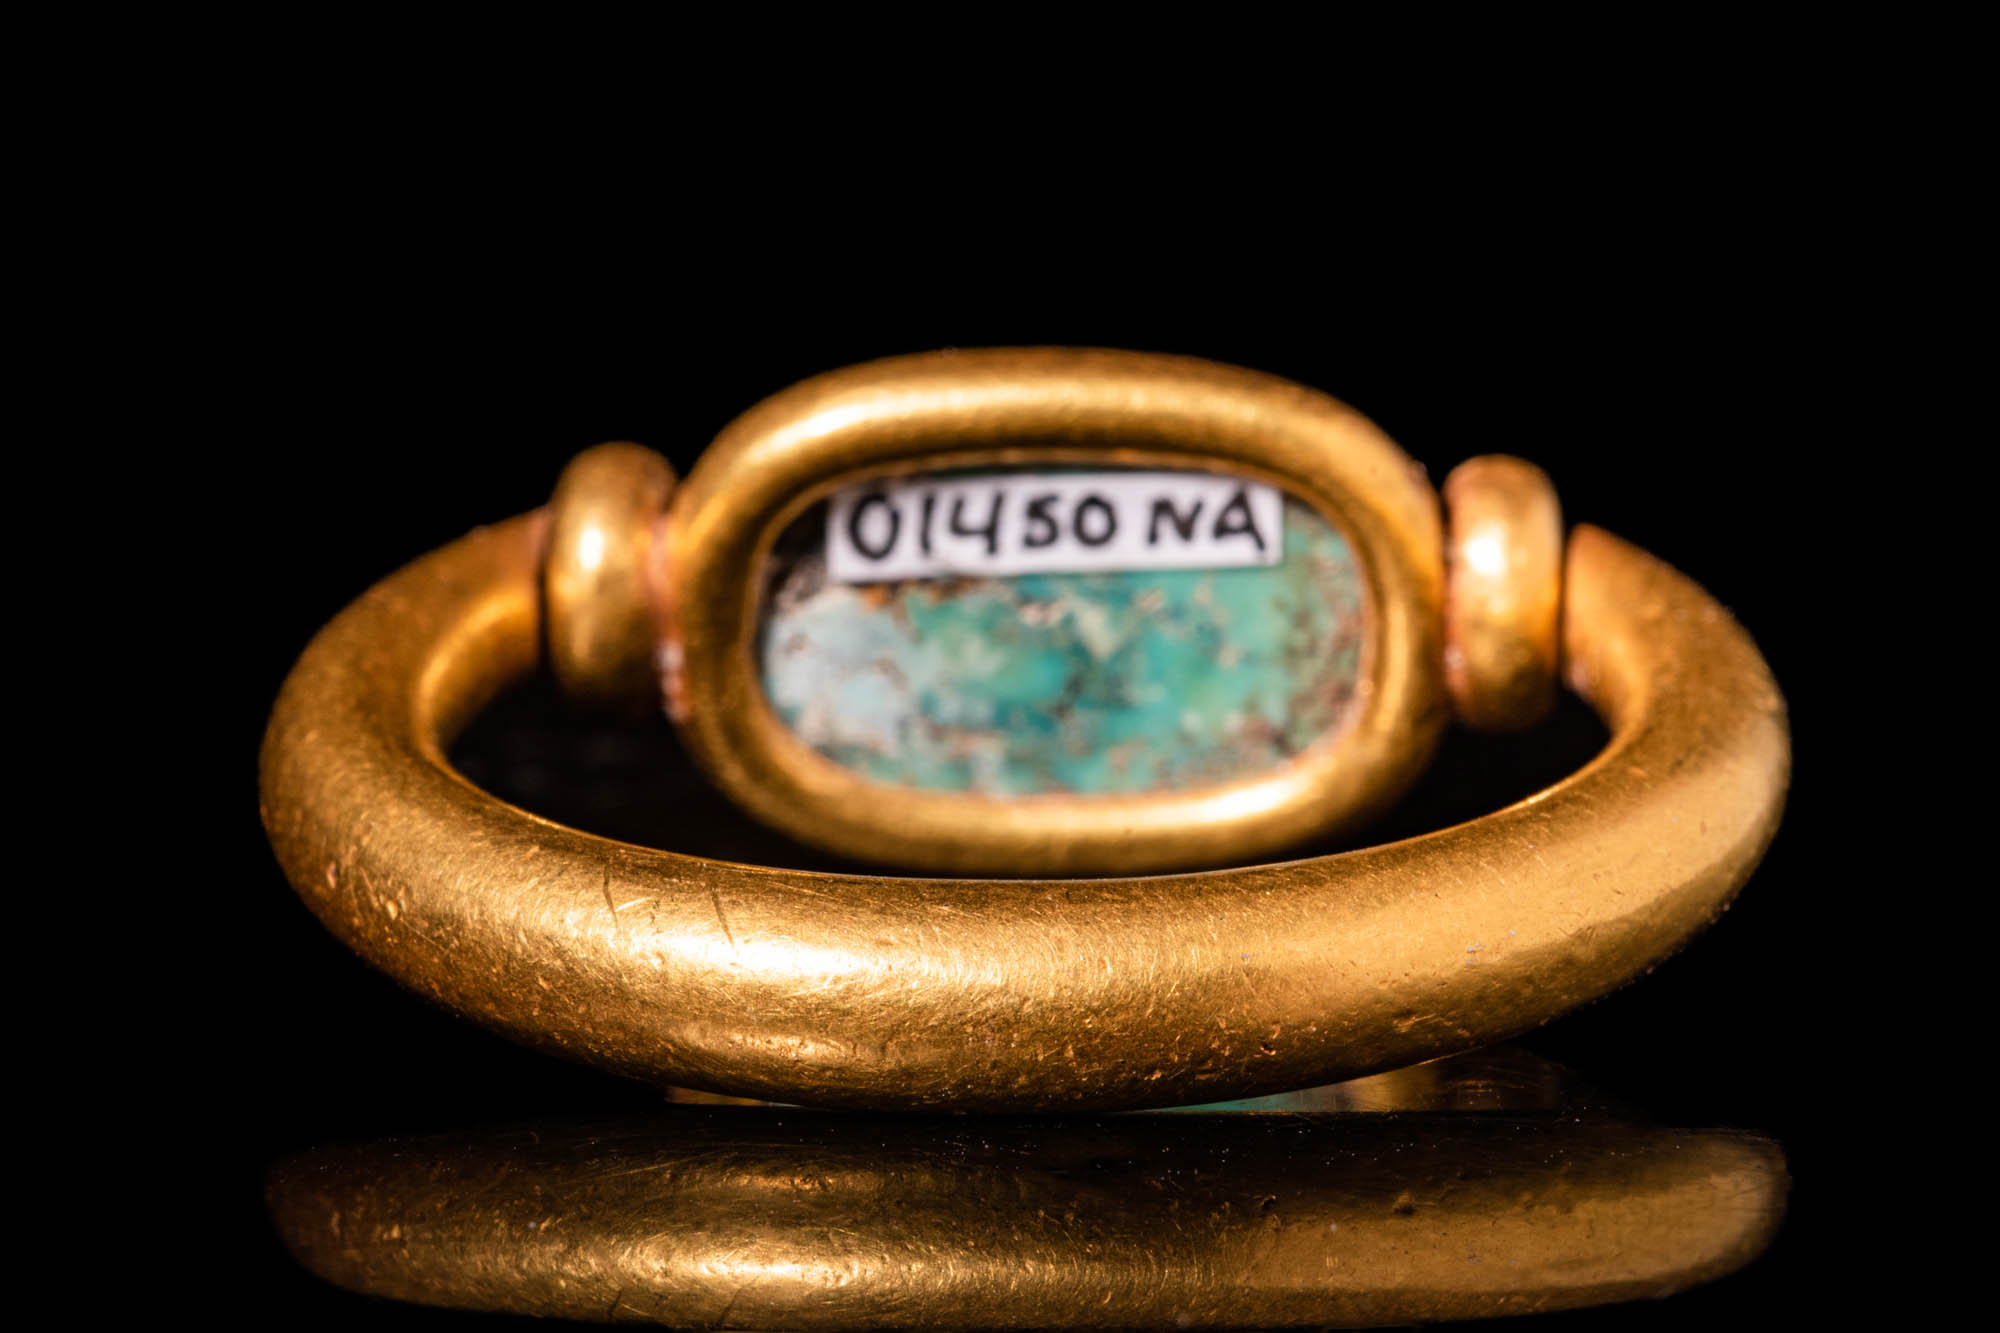 EGYPTIAN GOLD FINGER RING WITH TURQUOISE BEZEL - Image 4 of 5